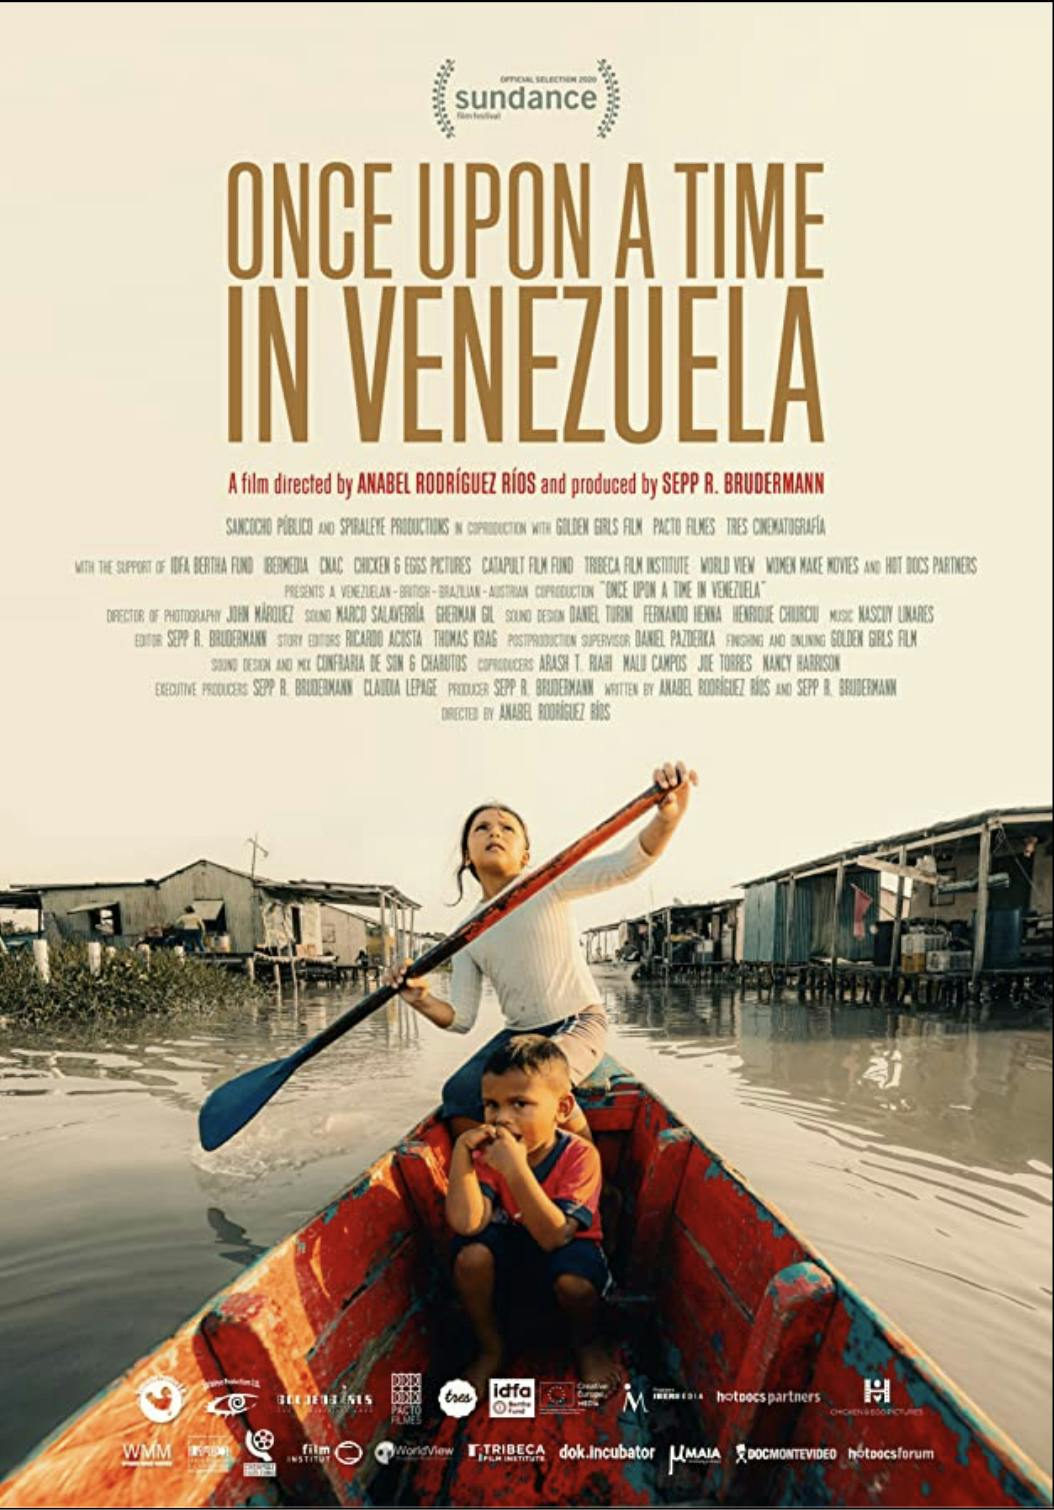 Once Upon A Time In Venezuela